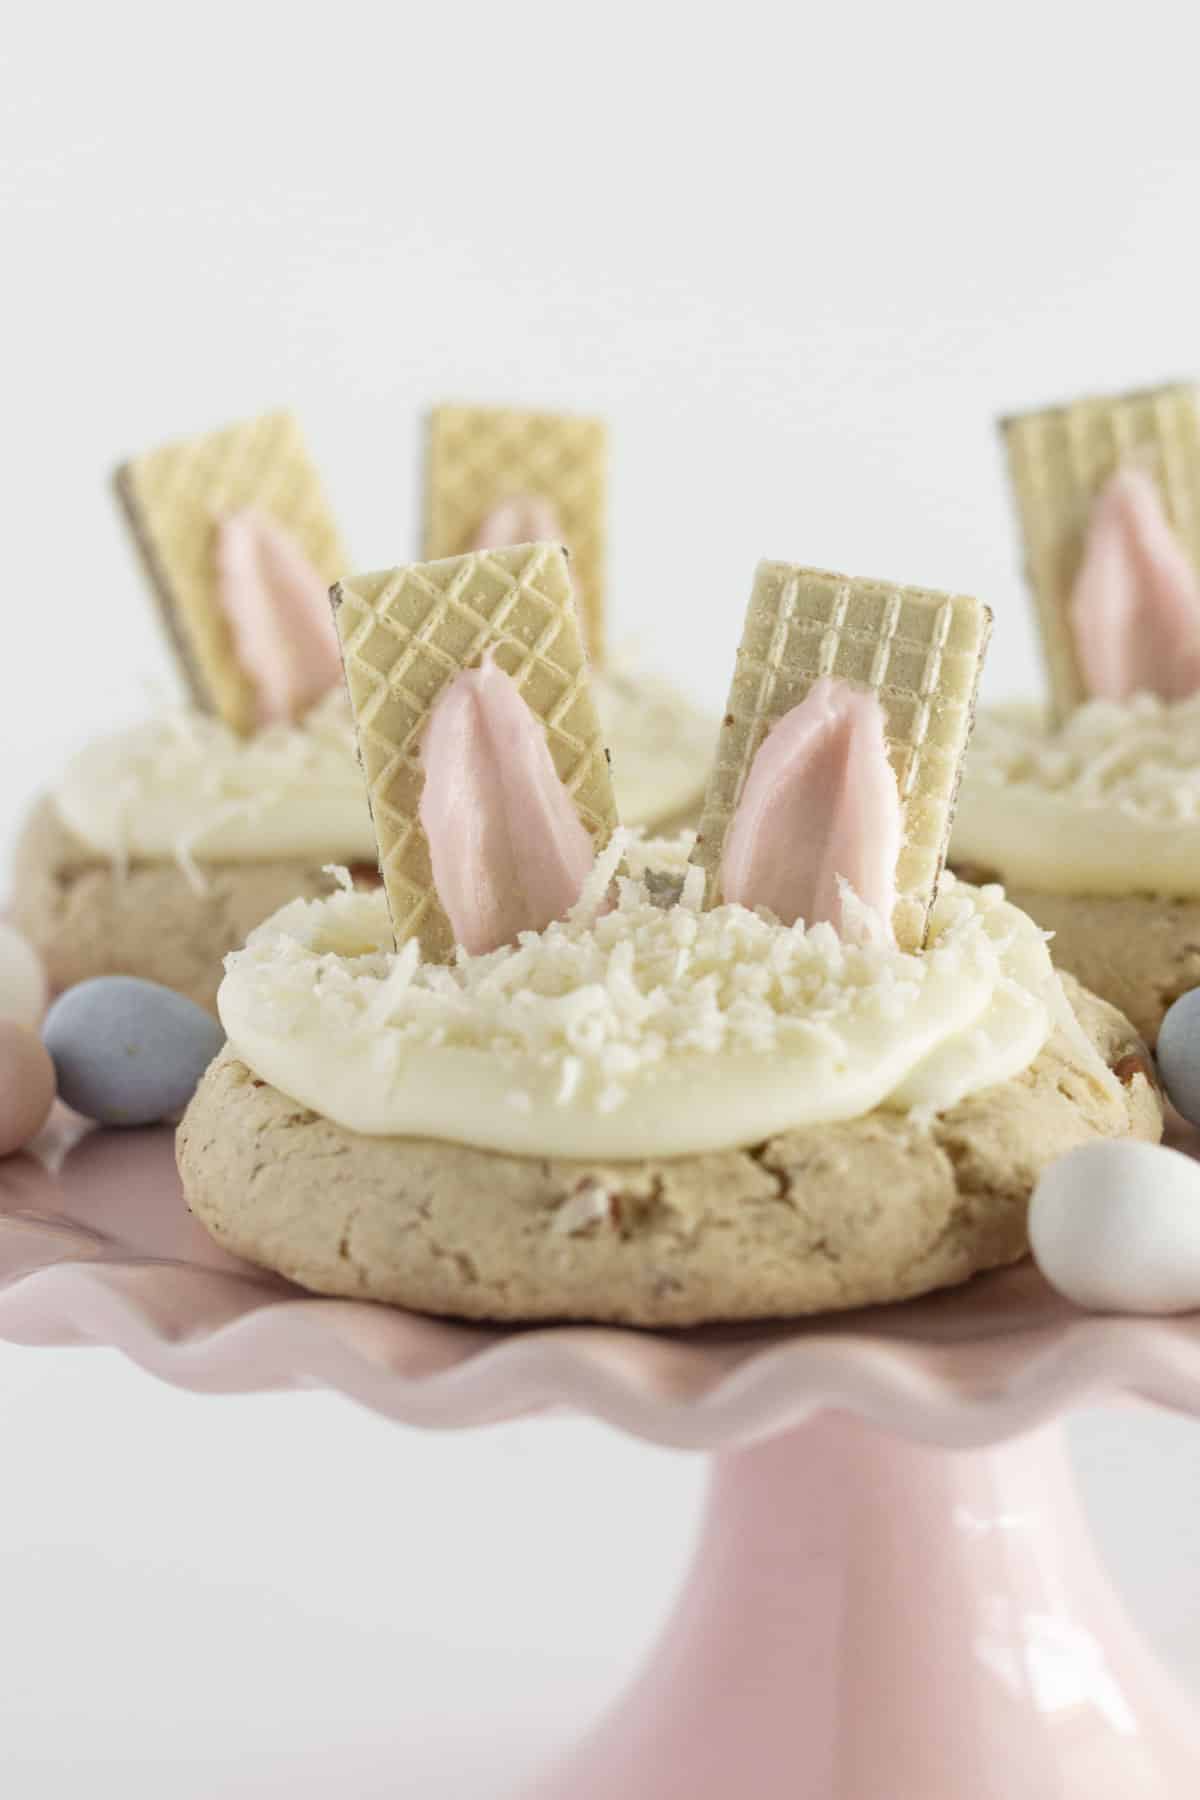 A large pink cake plate with three bunny cookies and chocolate eggs.